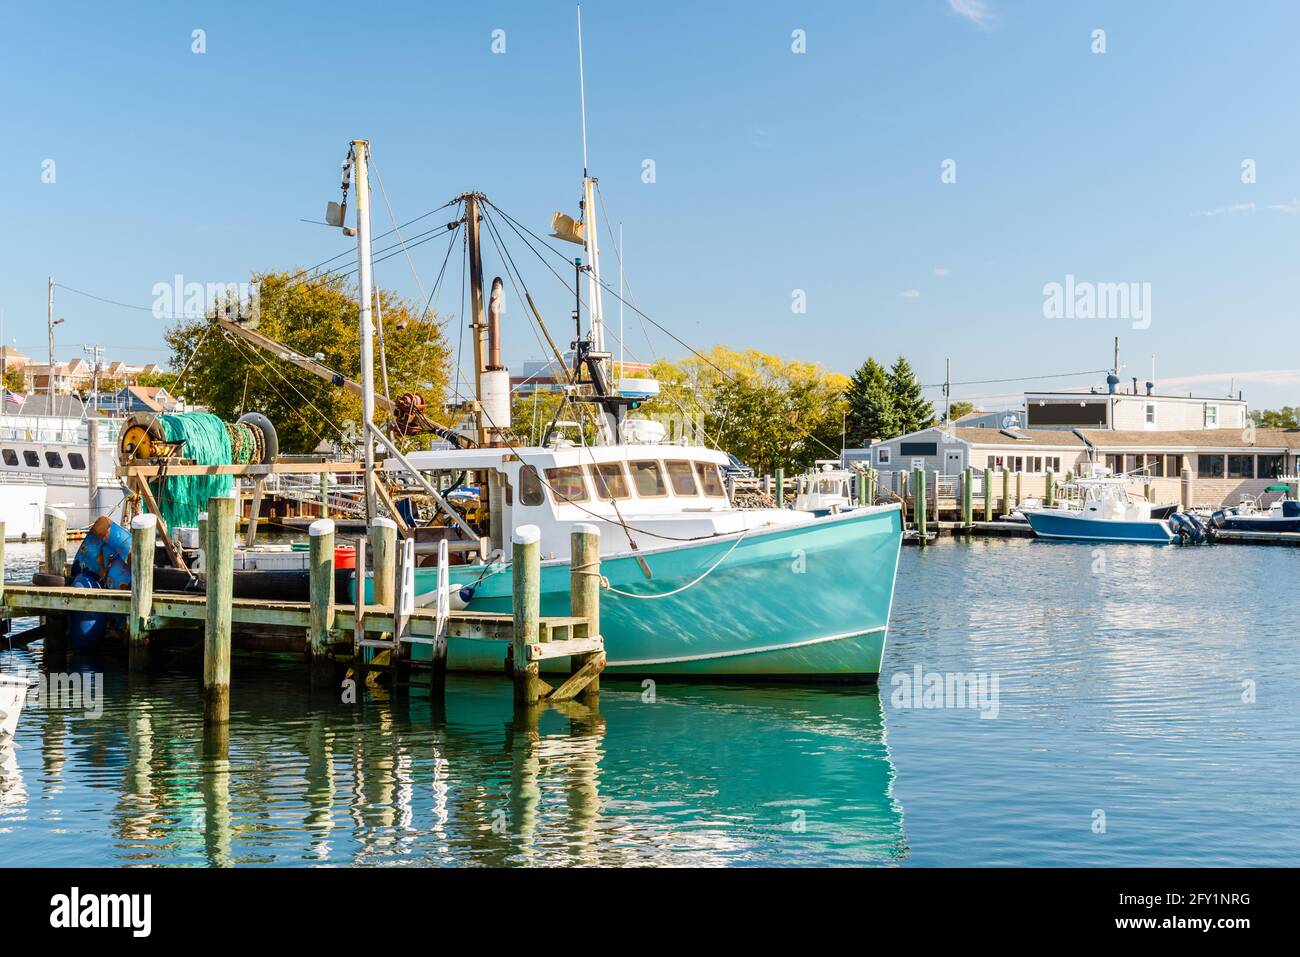 Fishing boat moored to a wooden pier in a harbour on a sunny autumn day. Reflection in water. Stock Photo